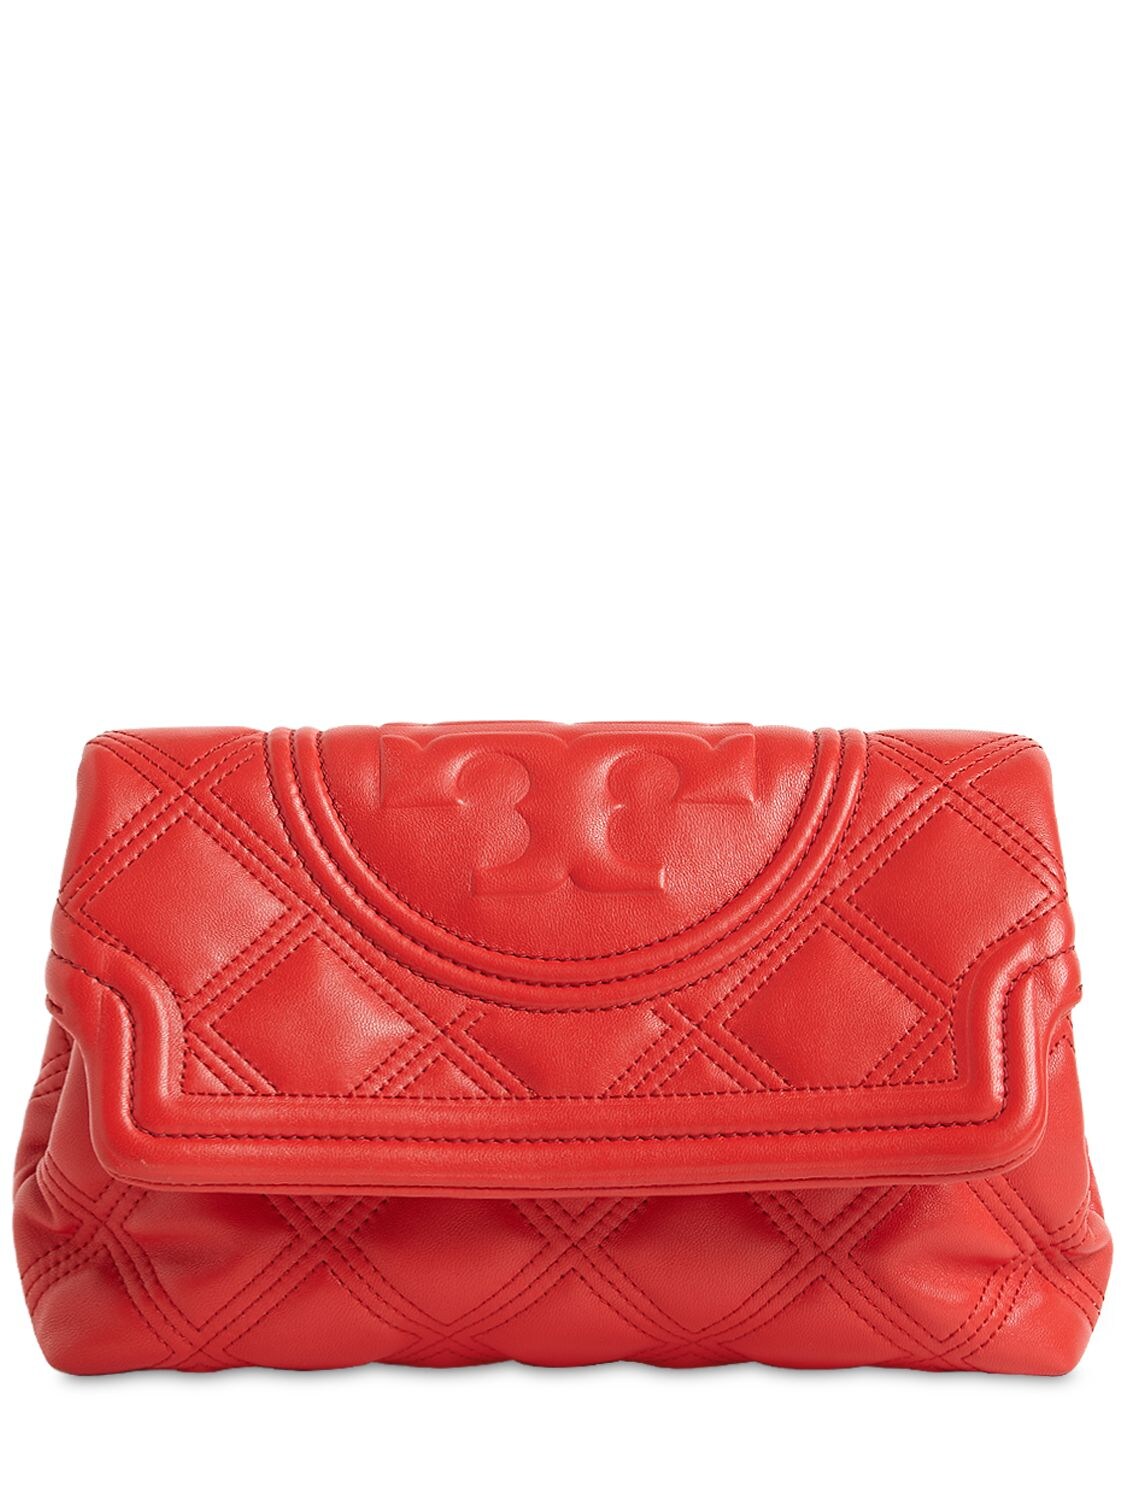 TORY BURCH FLEMING QUILTED LEATHER CLUTCH,71IM3V012-NJEY0